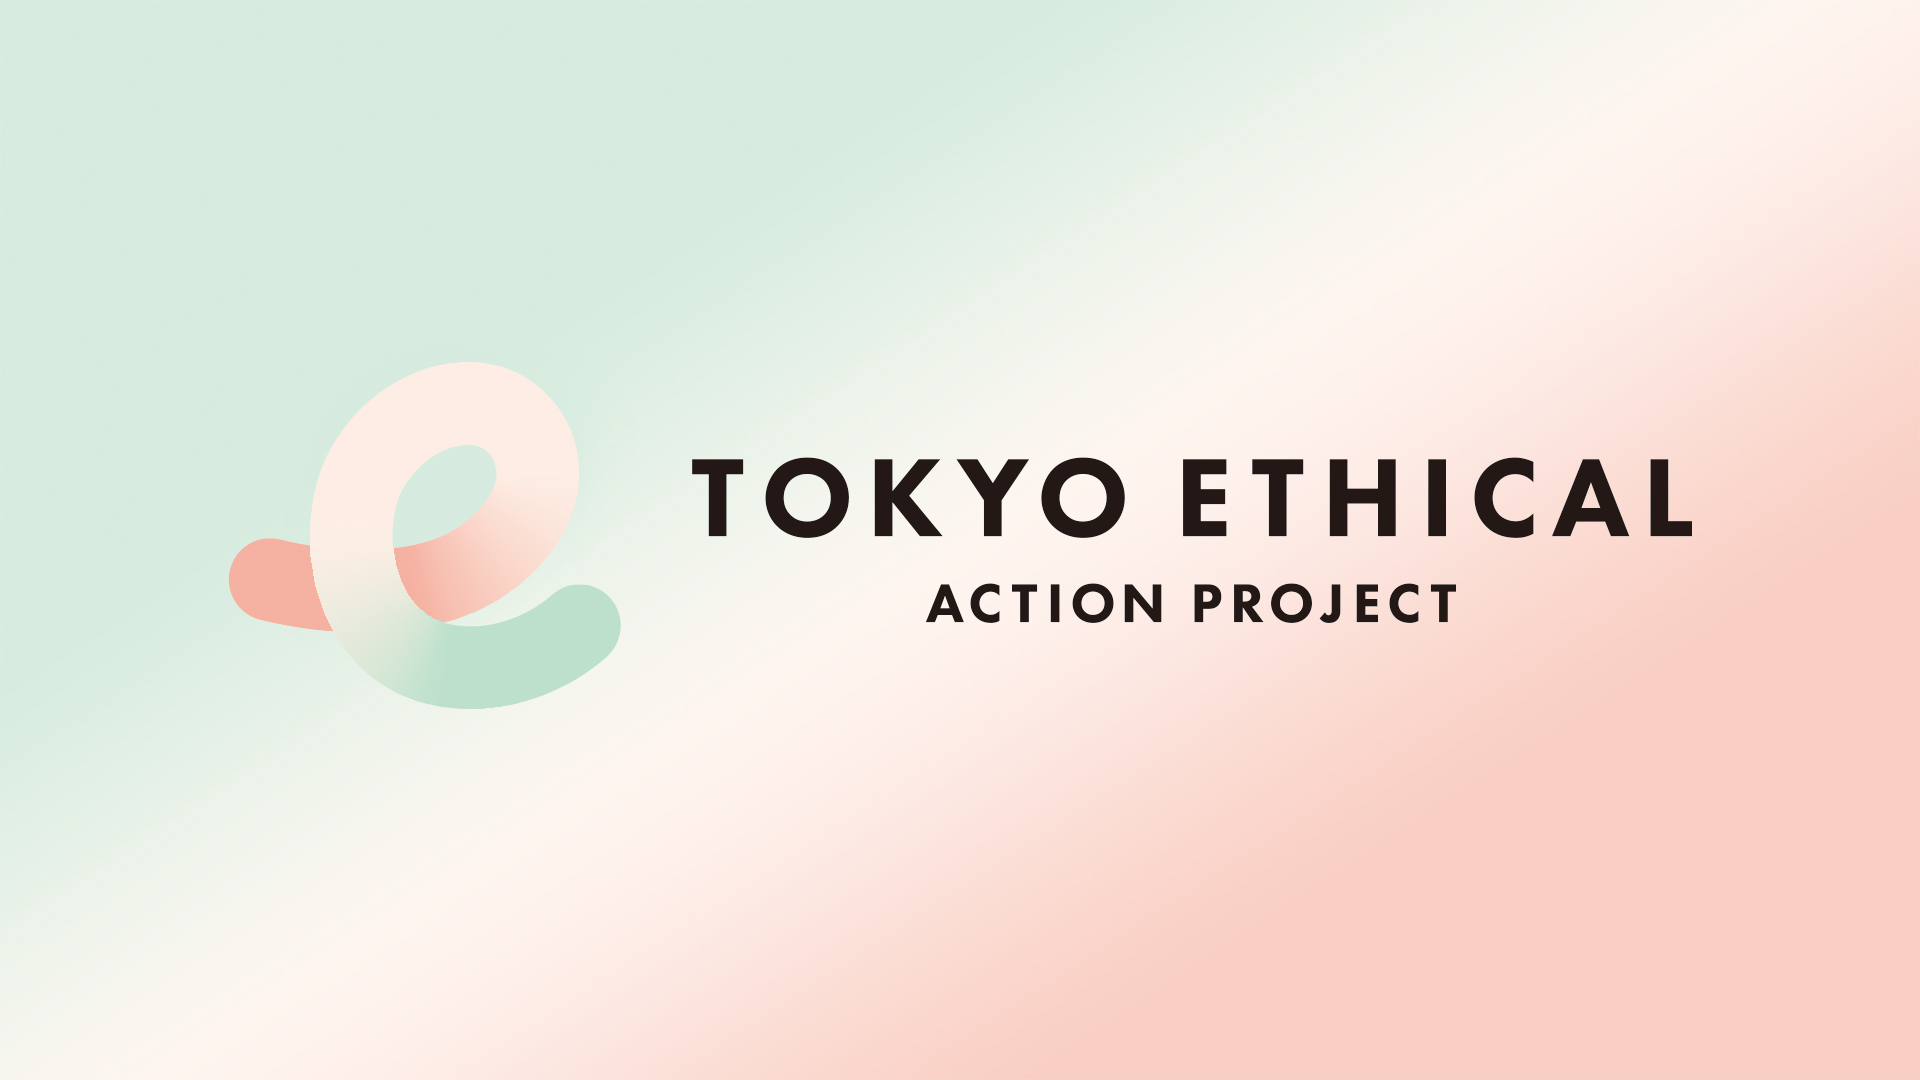 TOKYO ETHICAL ACTION PROJECT